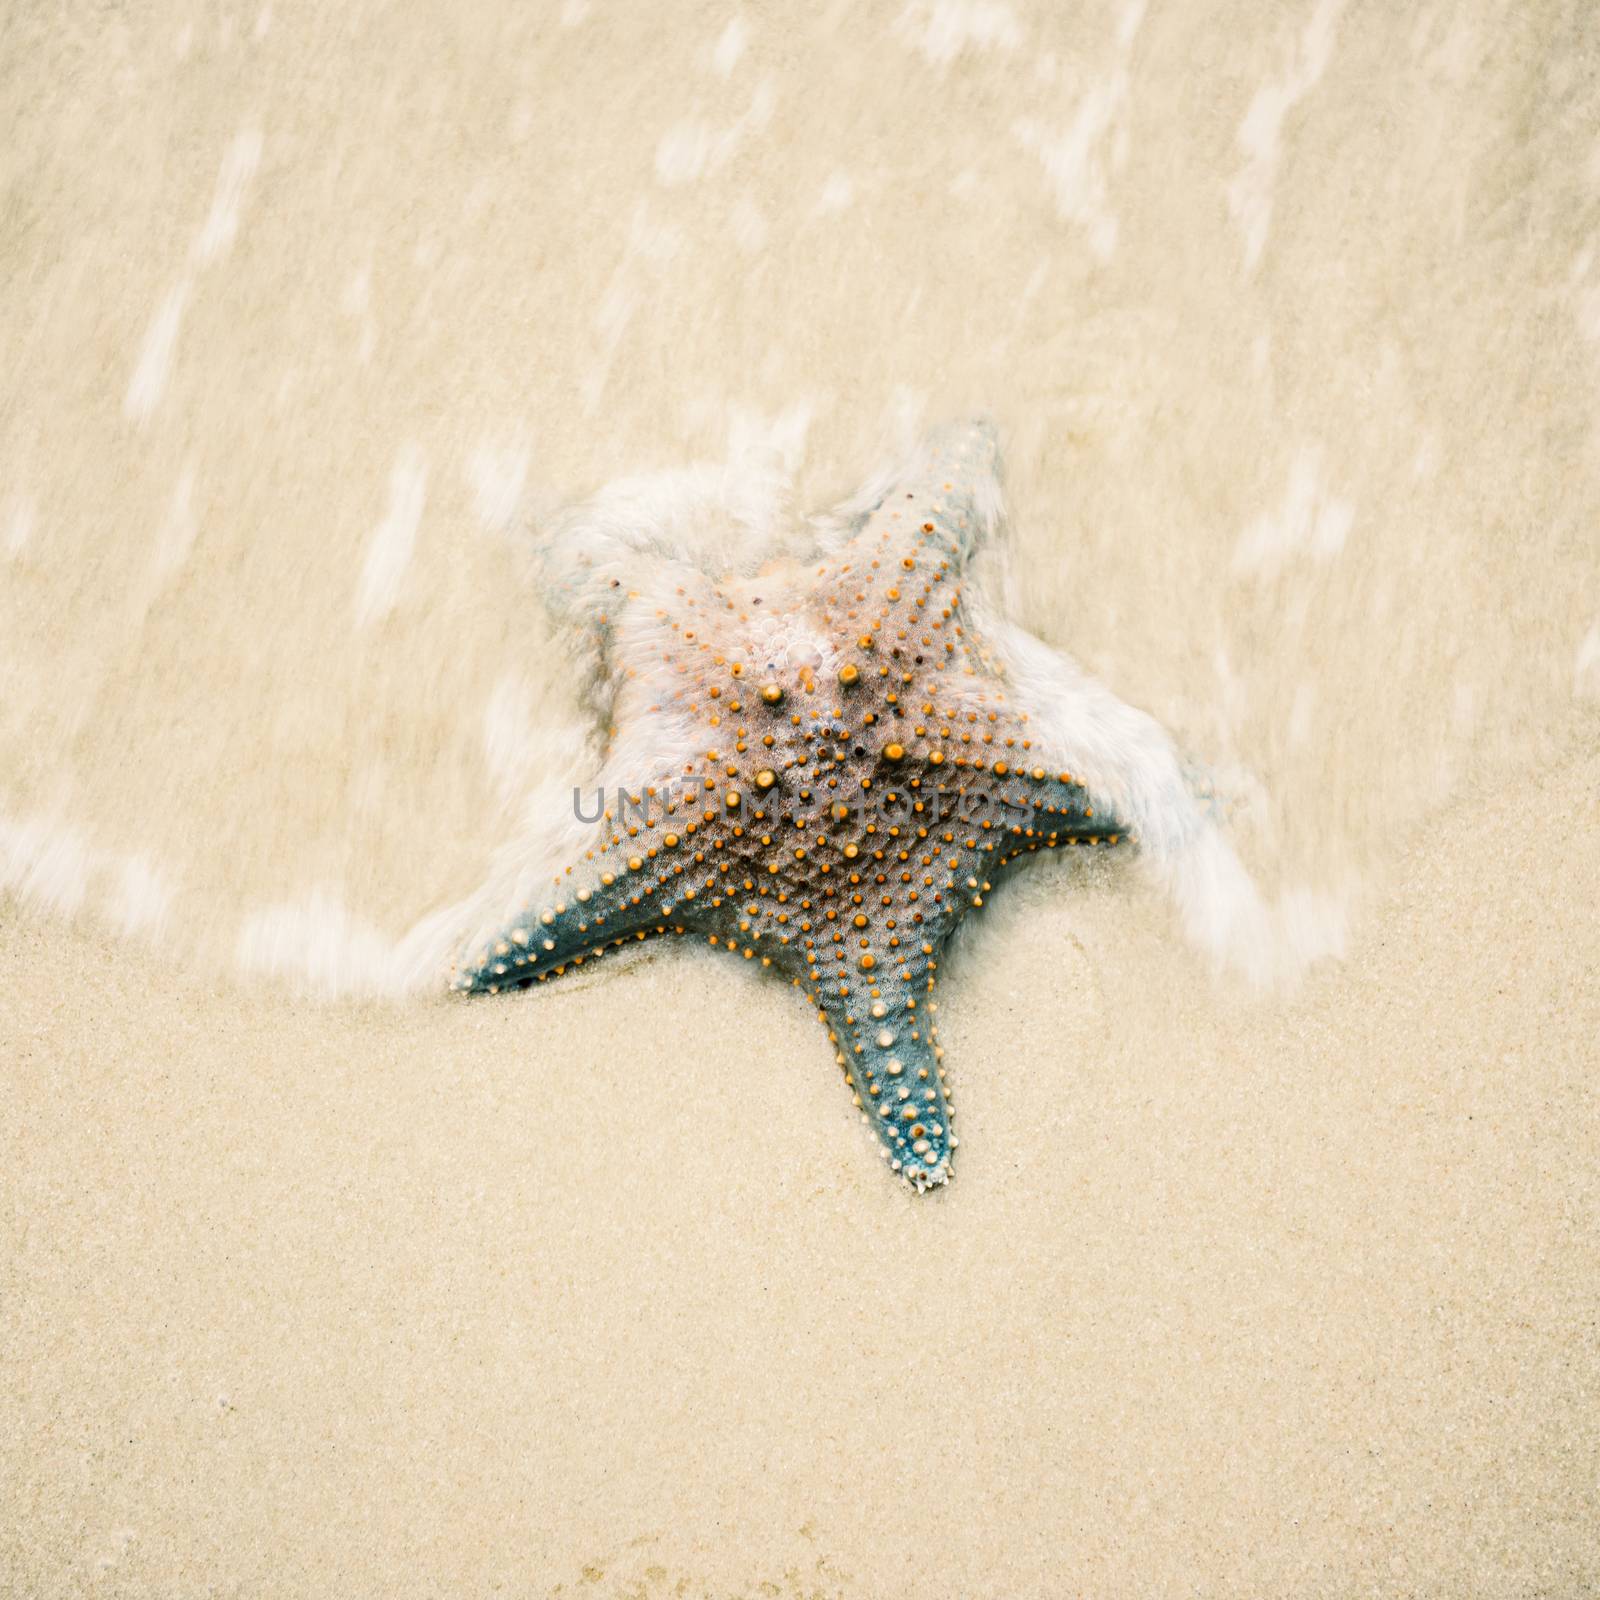 Starfish by itself on the beach at Moreton Bay during the day